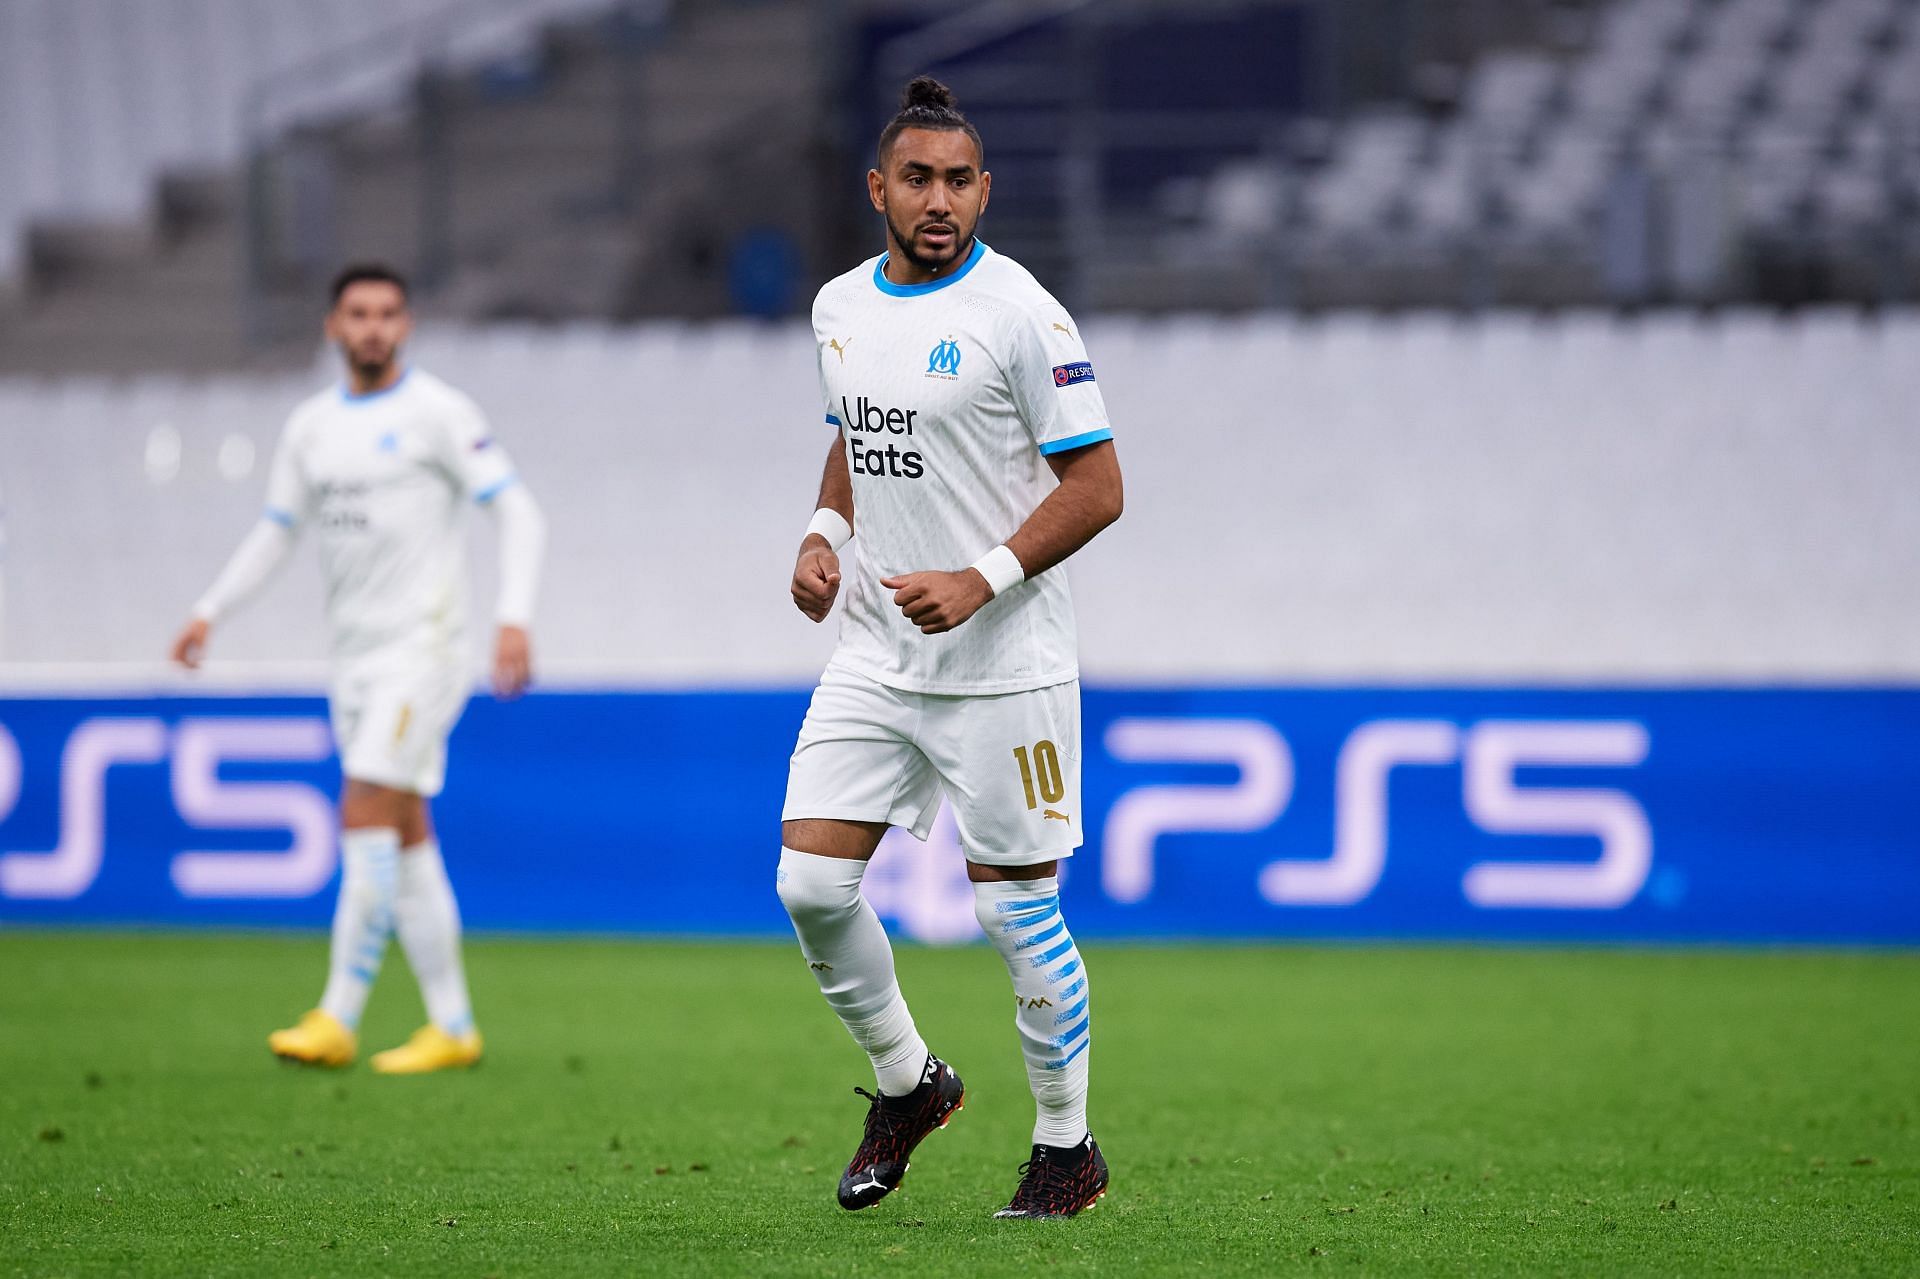 Payet has been superb at Marseille